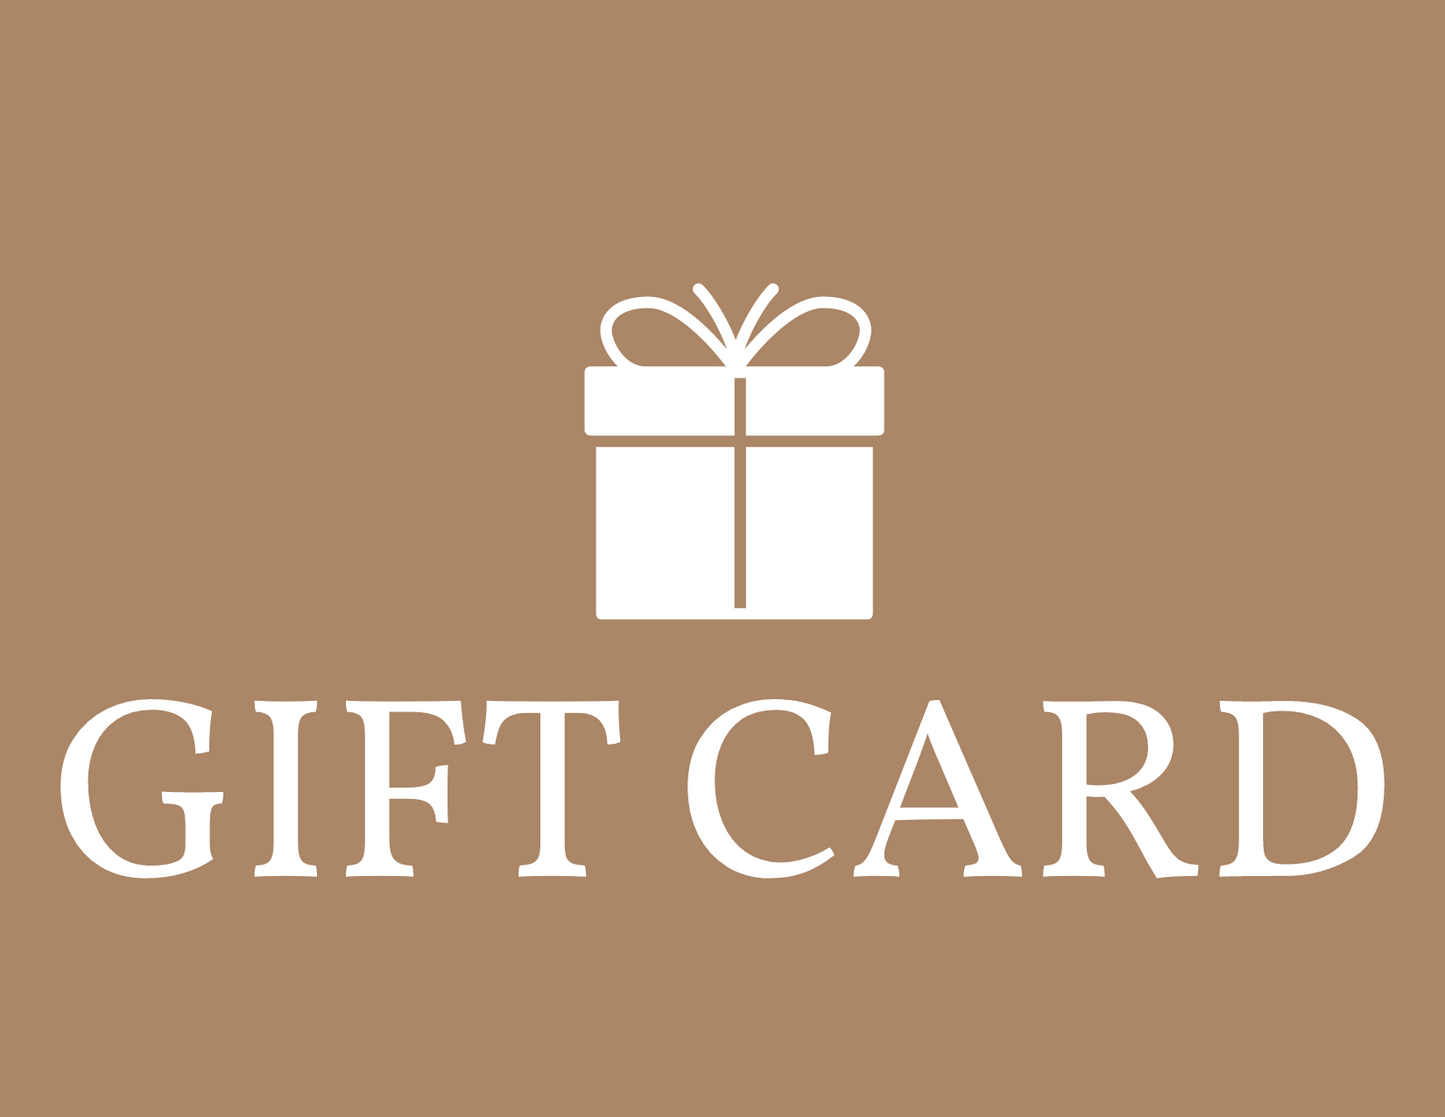 FRANKLY GIFT CARD